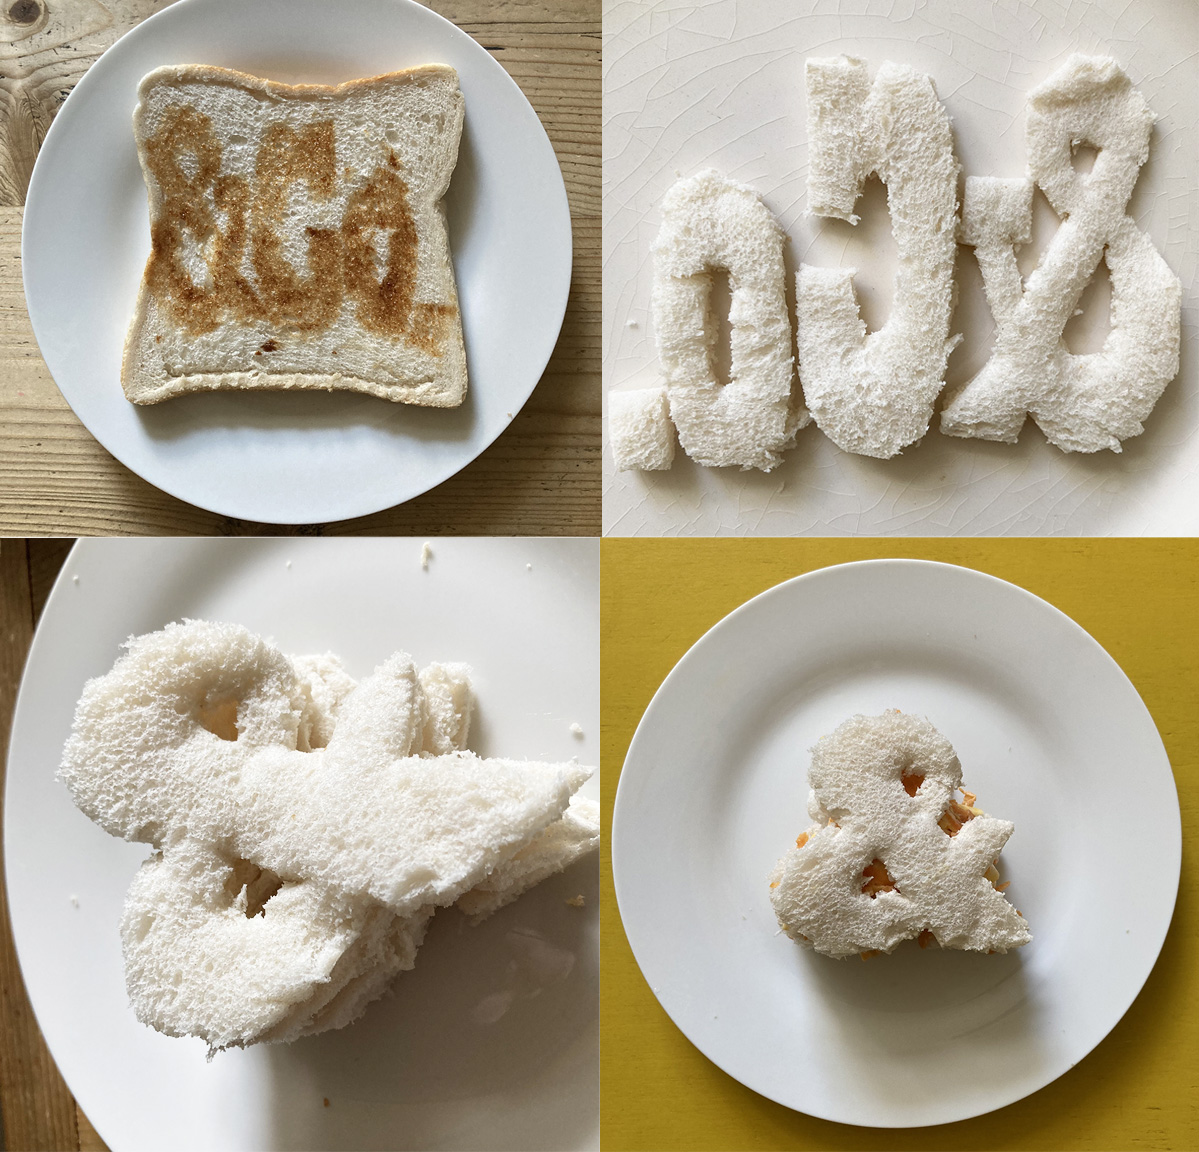 Four photos showing monoprinting '& Co' with bread and Marmite and making a sandwich from an ampersand